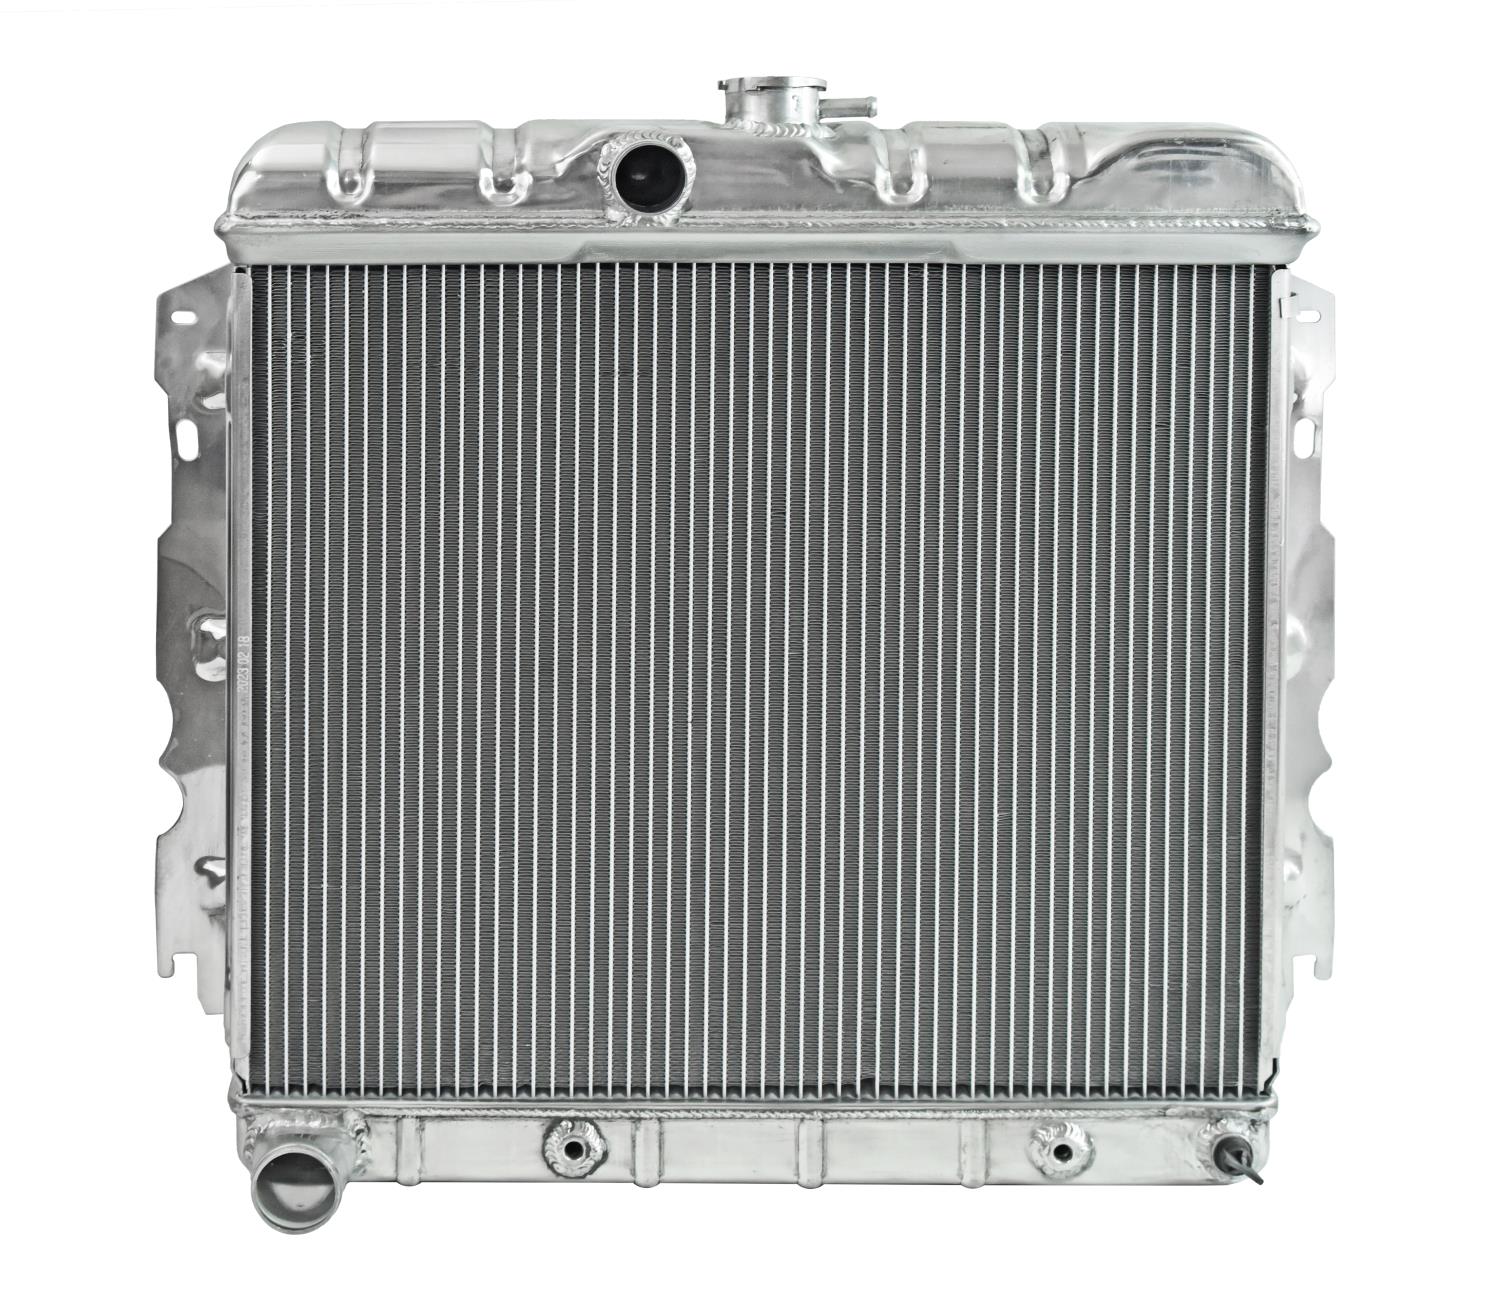 Reproduction Aluminum Radiator for Select 1966-1969 Mopar B-Bodies With Big Block Engines